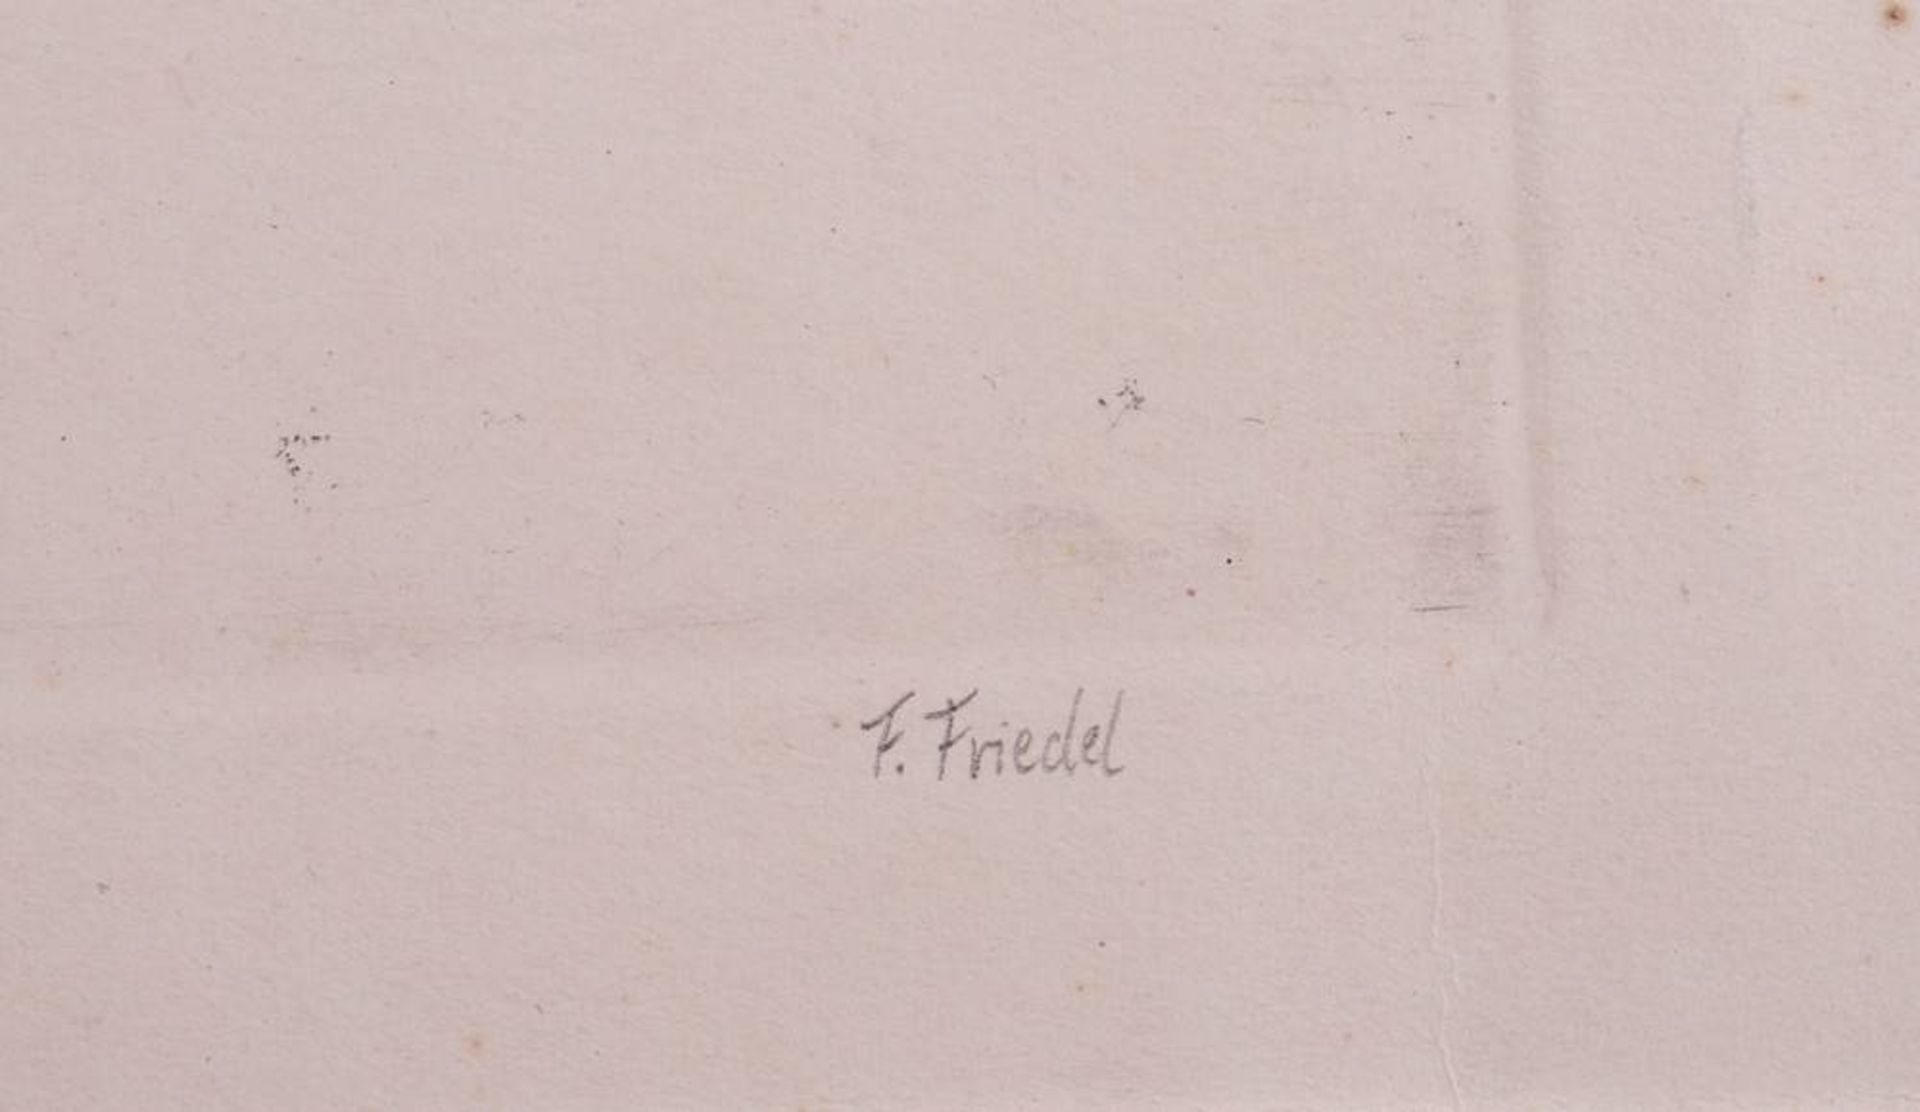 F. Friedel - Image 3 of 3